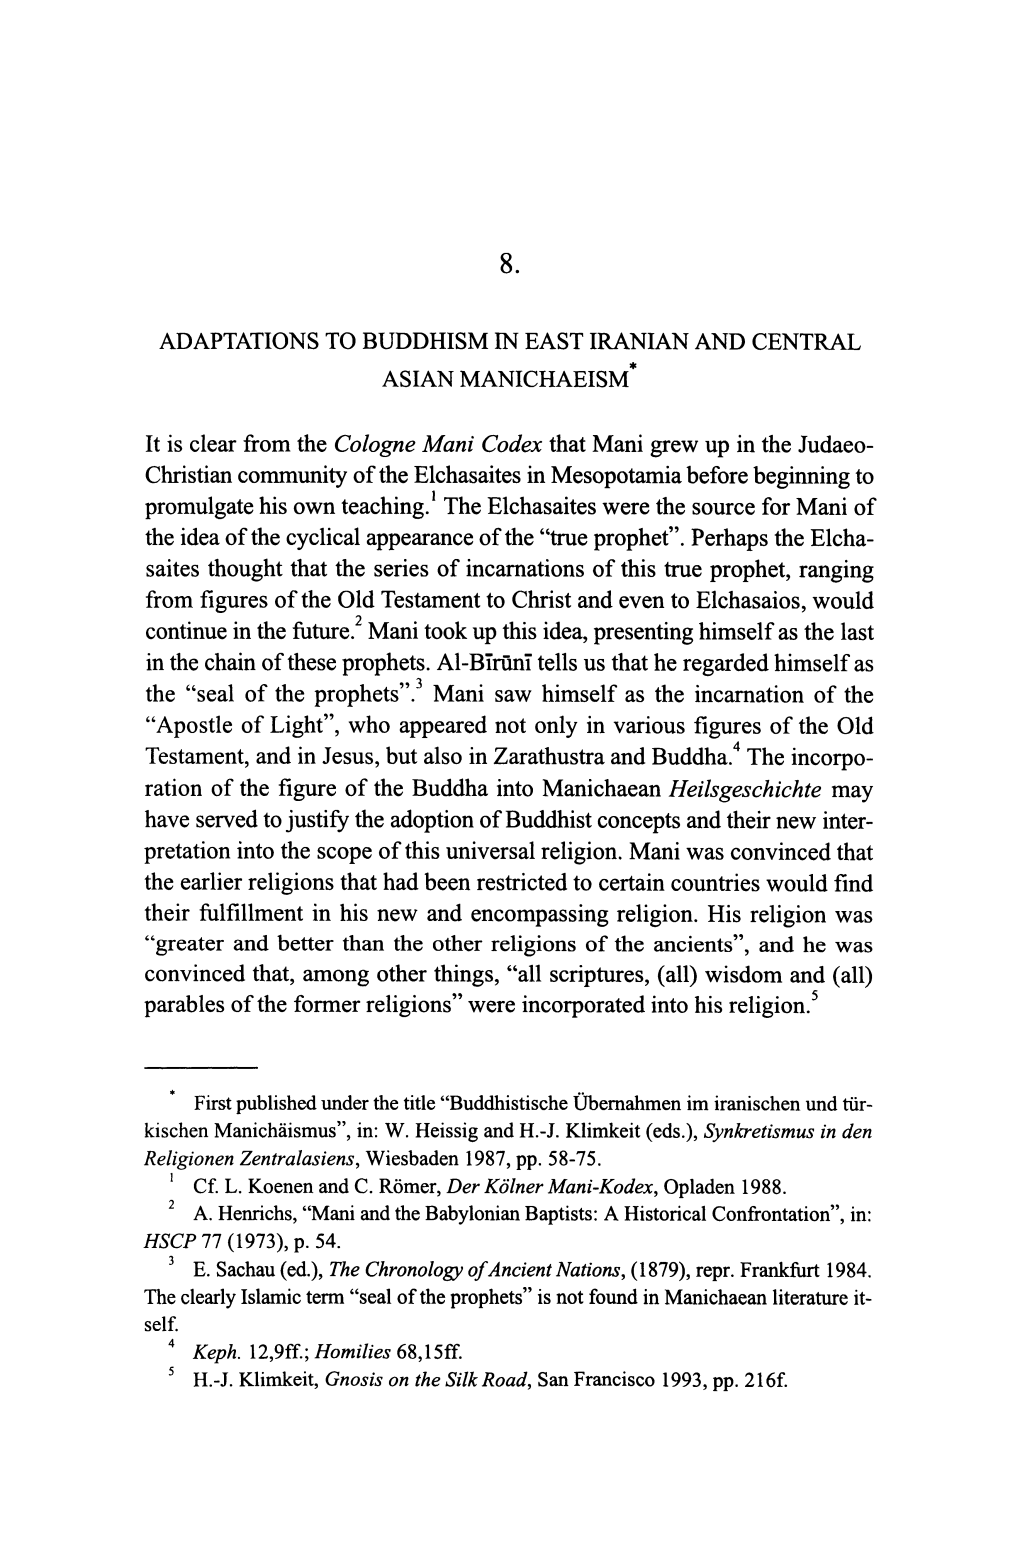 Adaptations to Buddhism in East Iranian and Central Asian Manichaeism *